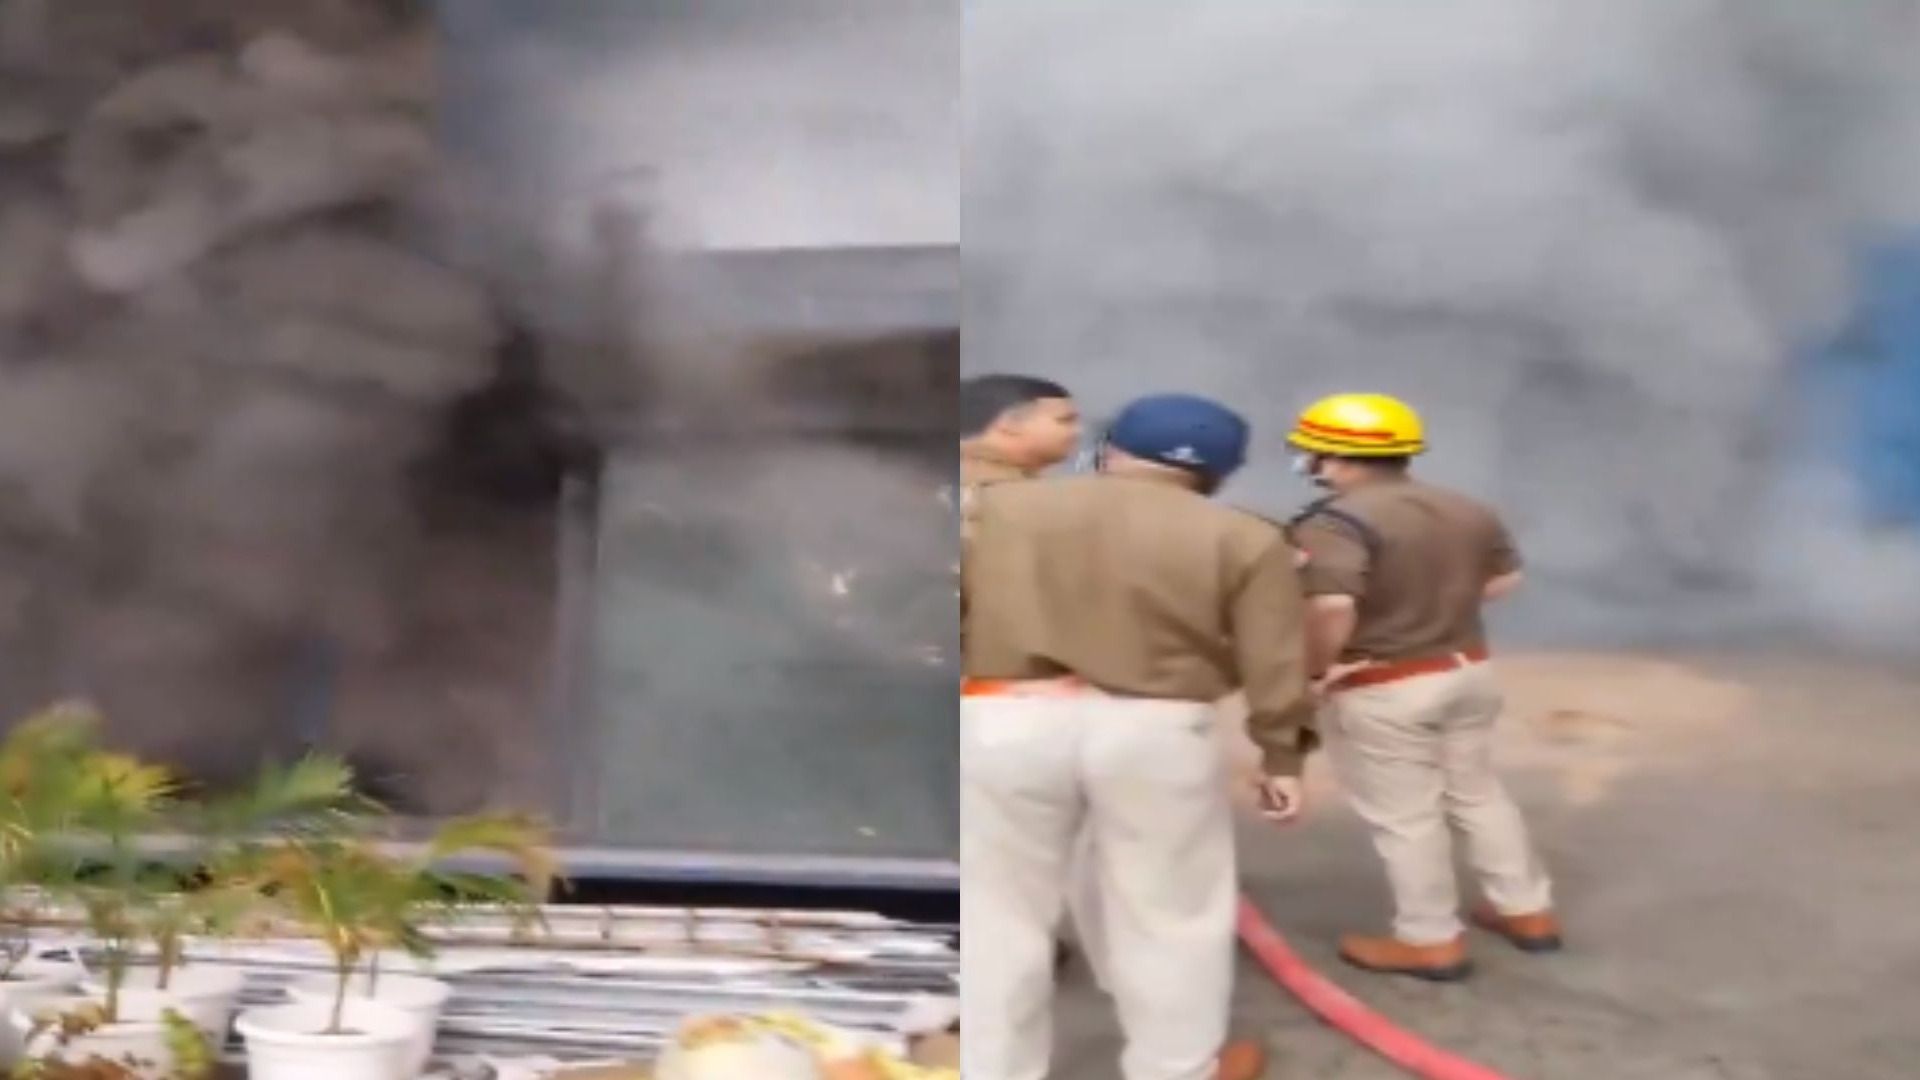 republicworld.com - Ronit Singh - Ghaziabad: Massive Fire Erupts At Door Manufacturing Company In Mohan Nagar Industrial Area